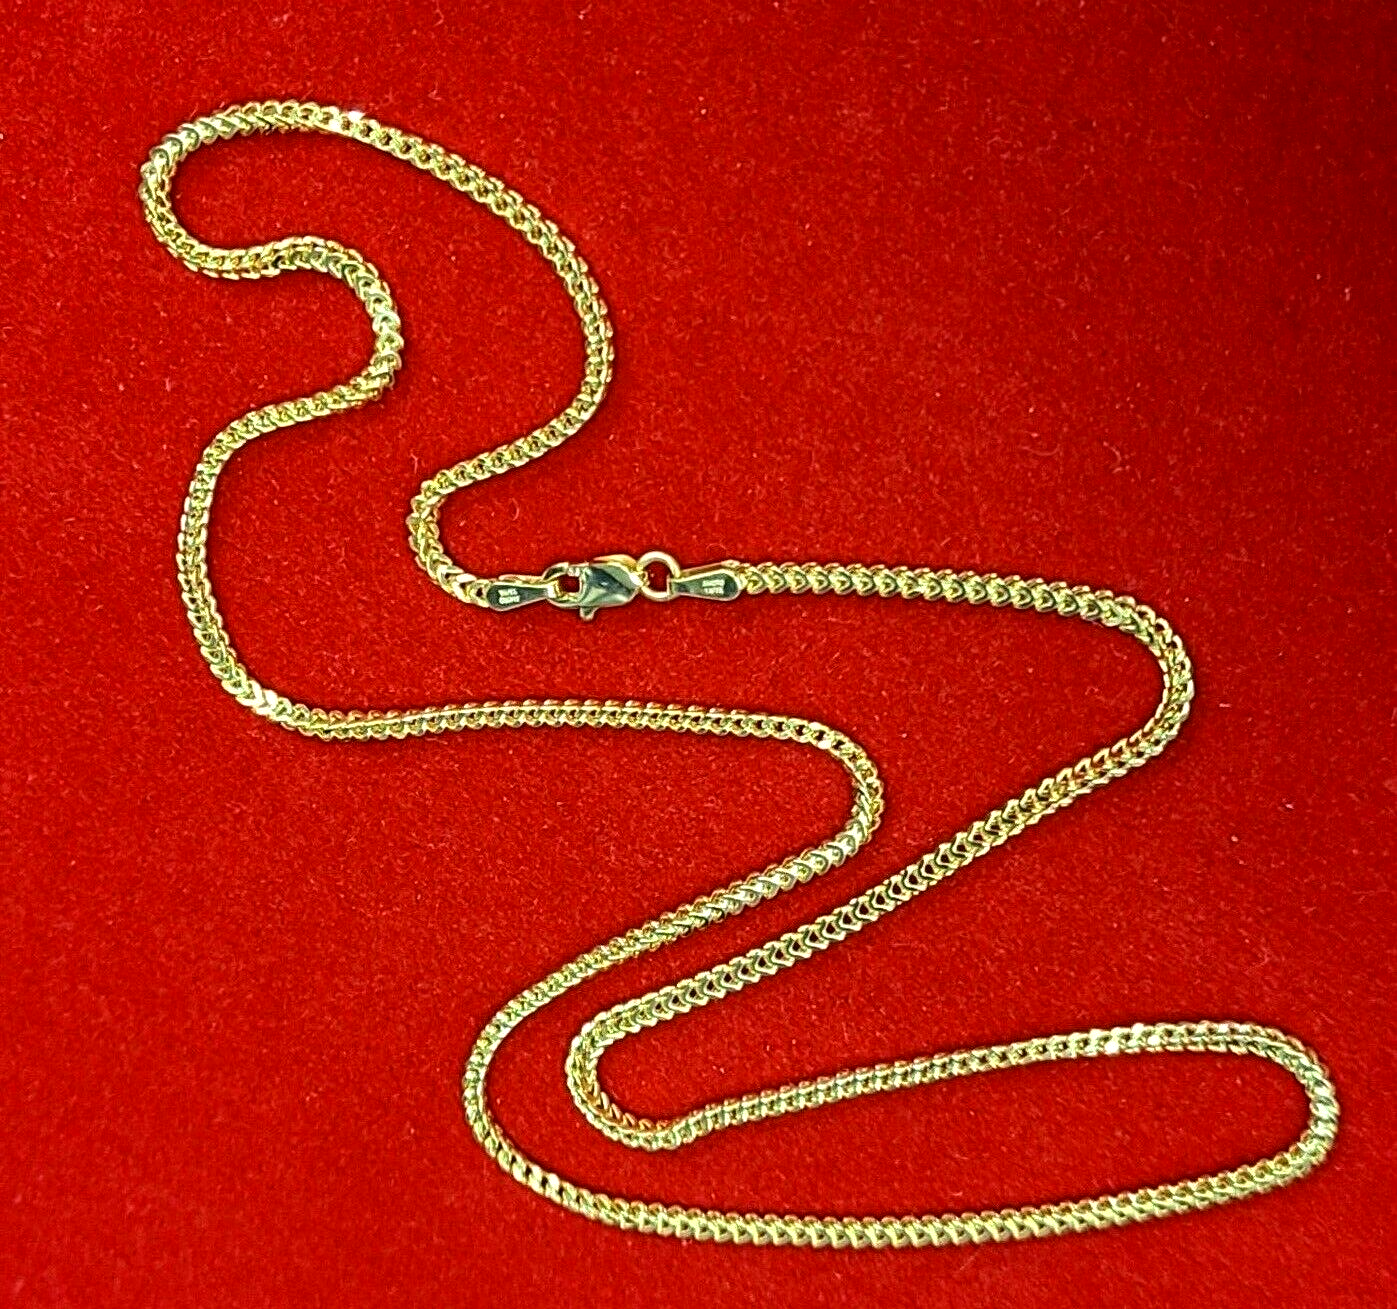 14K Yellow Gold Franco Chain 2.10mm wide Chain Necklace 20"